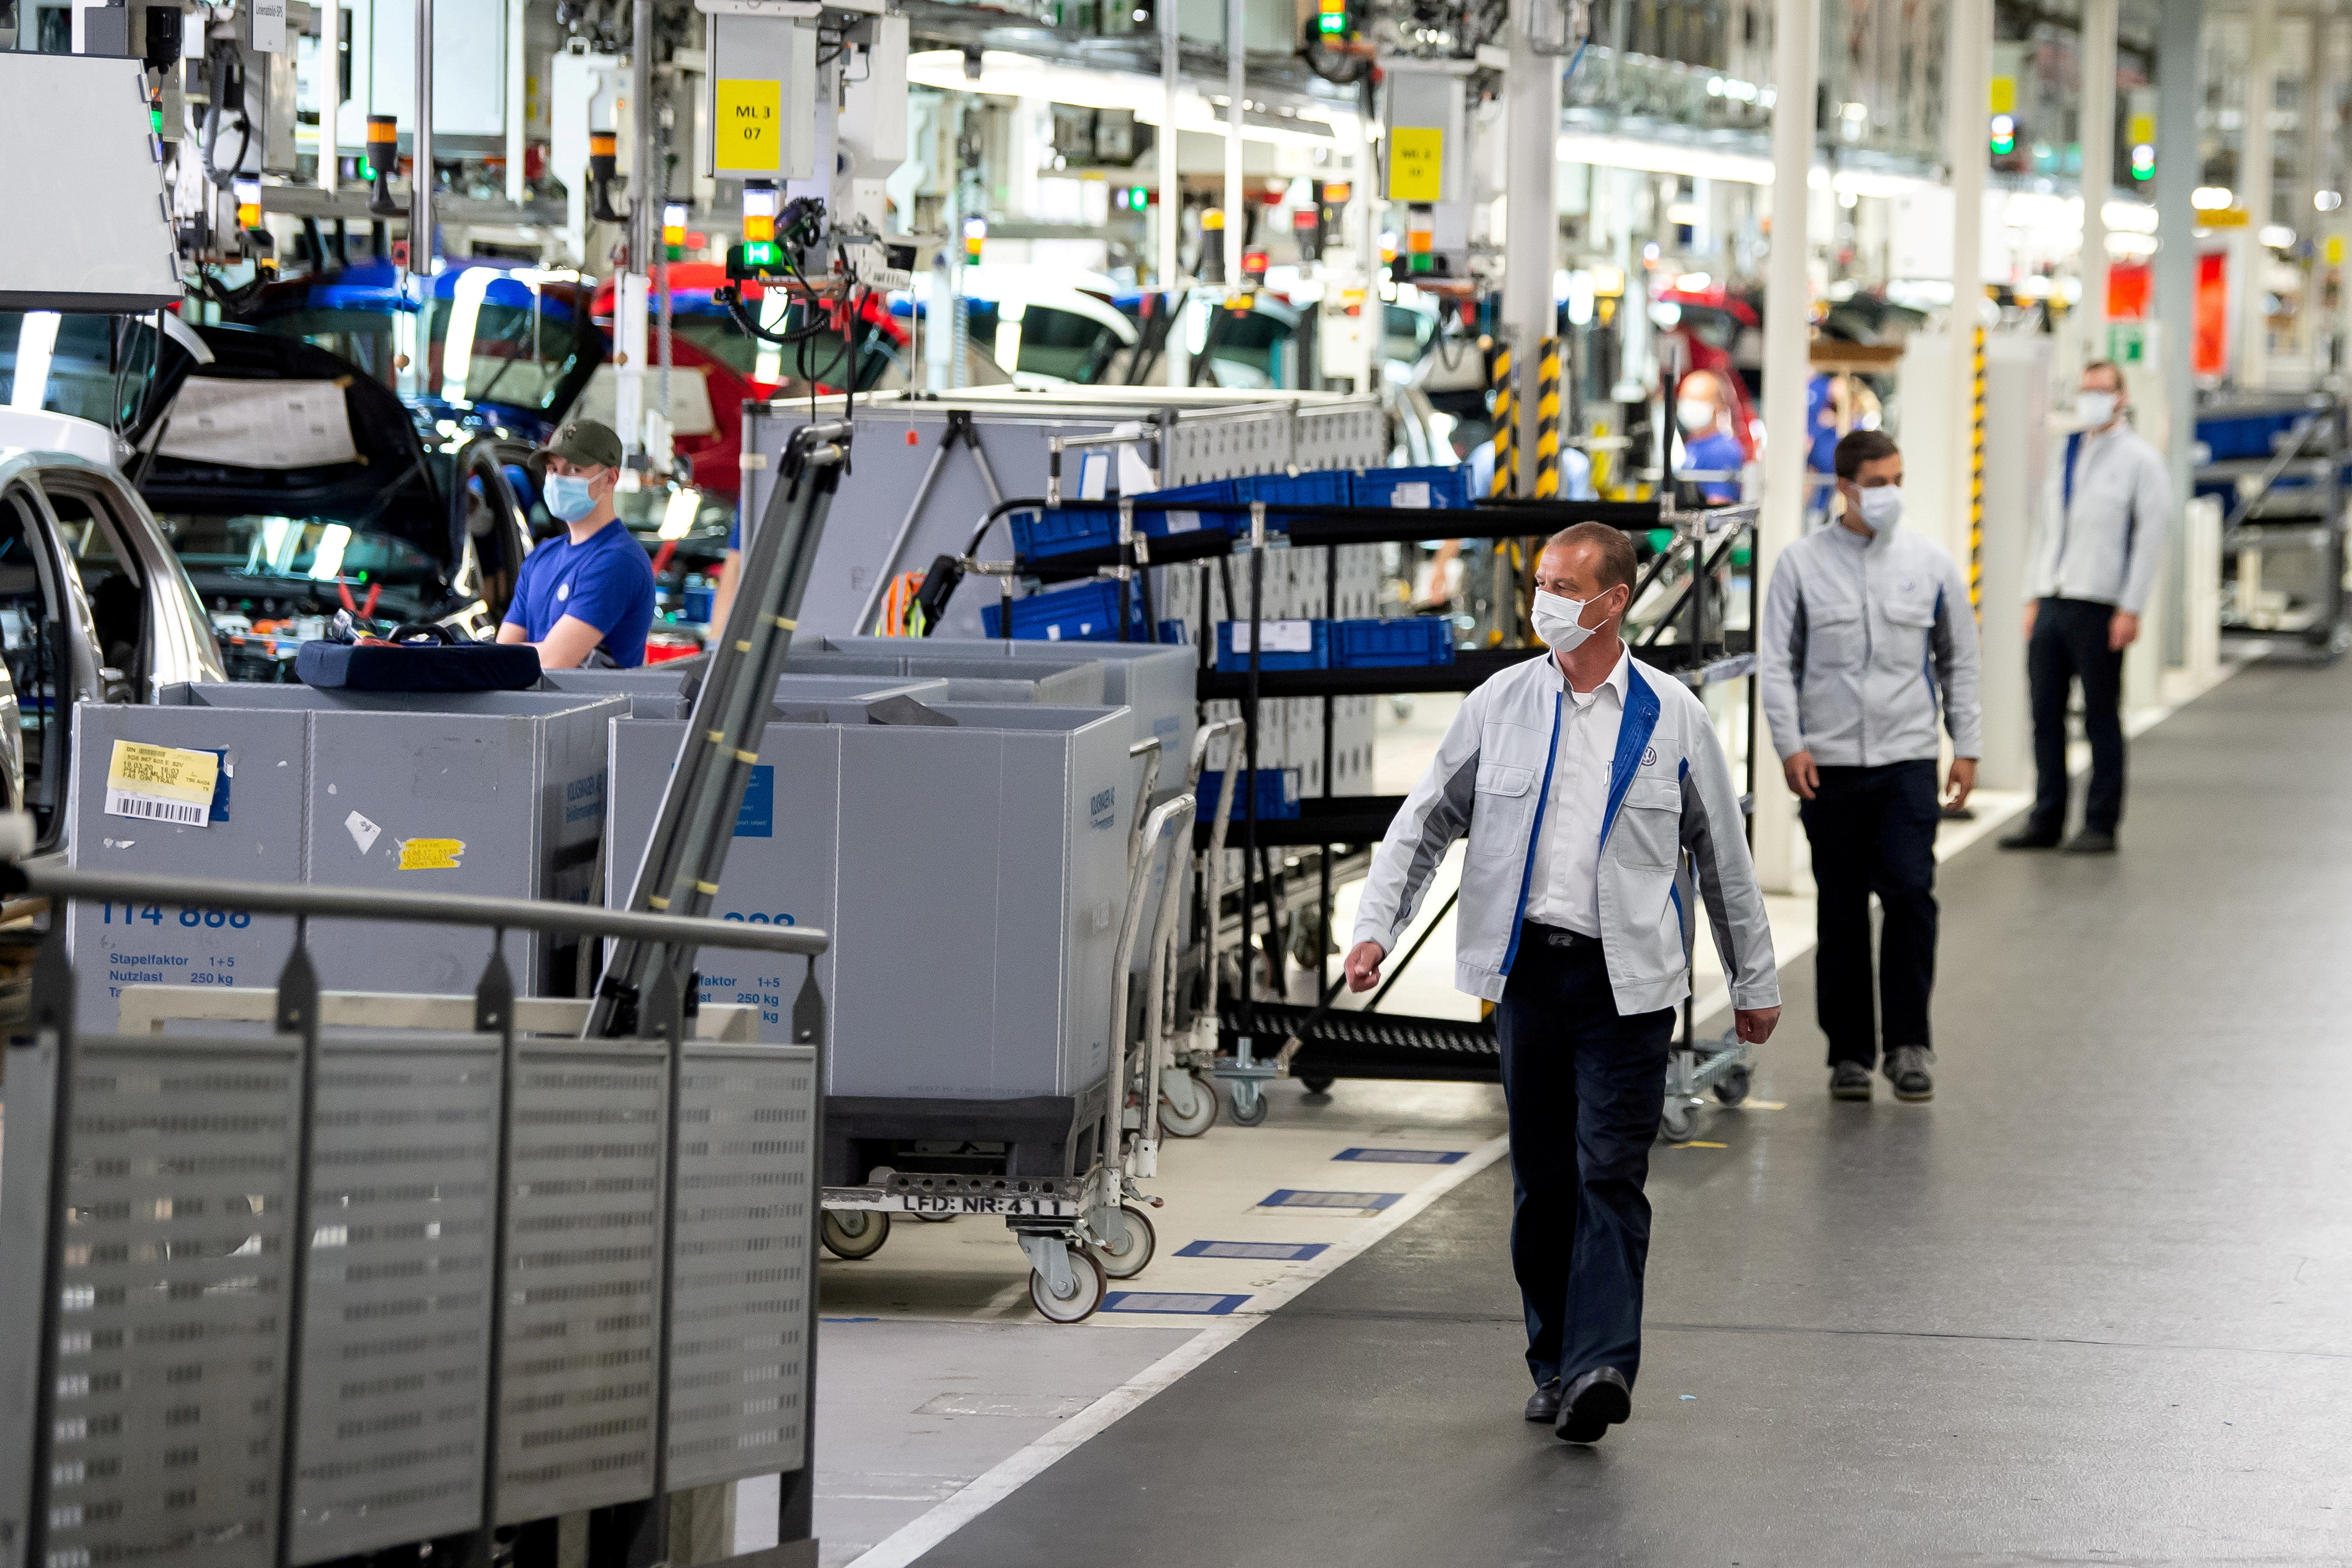 Volkswagen assembly line in Wolfsburg, Germany, Europe's largest car factory, during the coronavirus pandemic